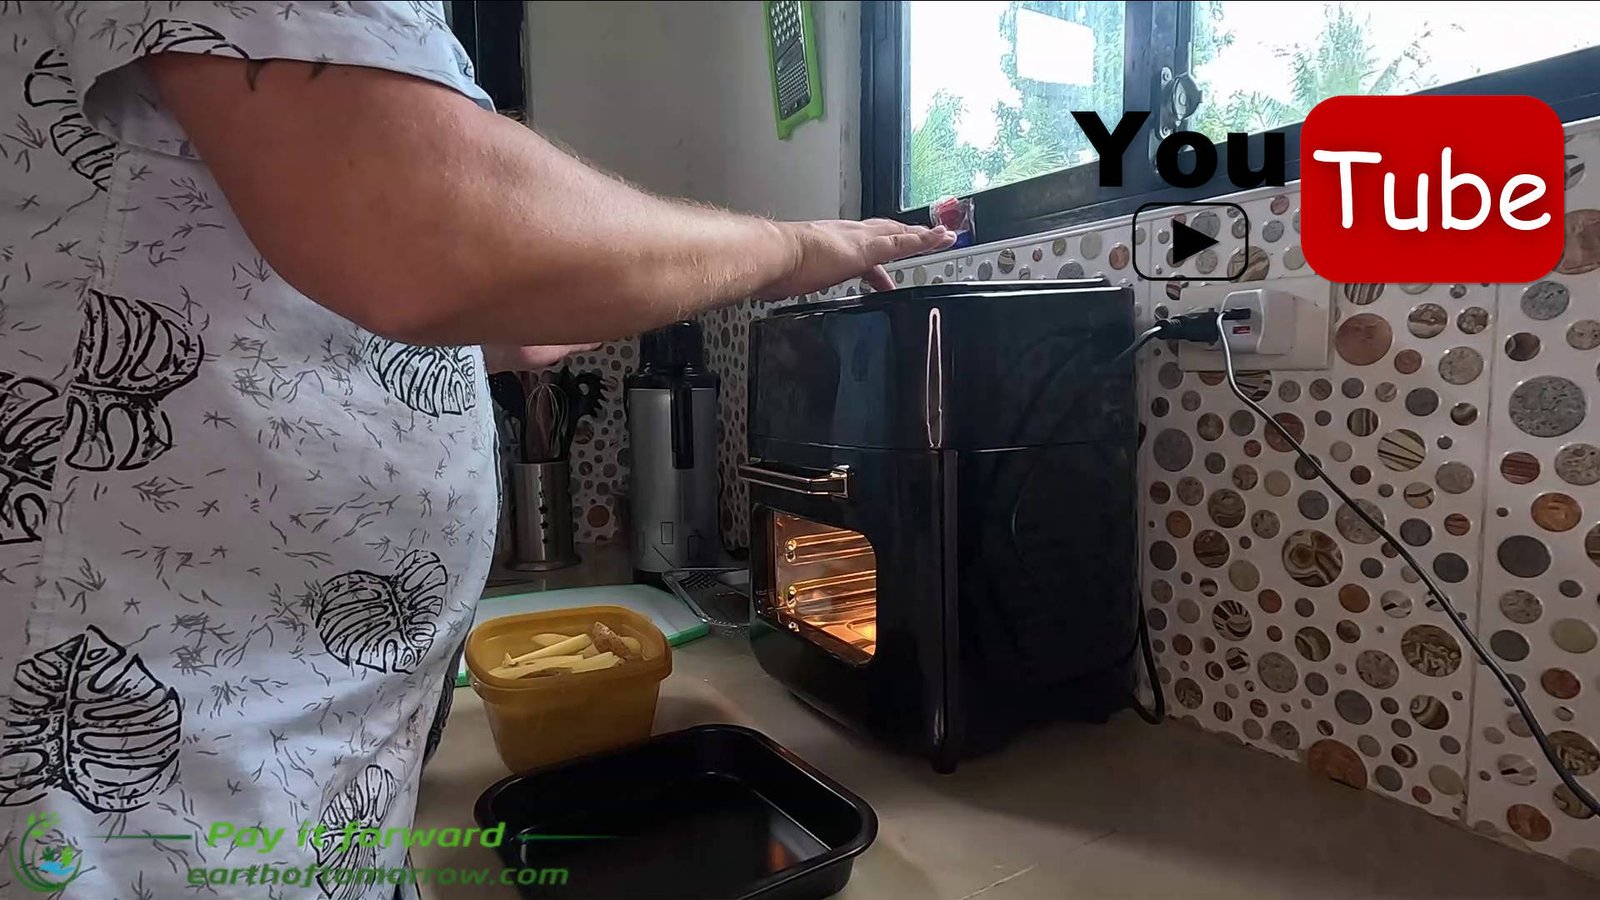 15 liters airfryer bought on shopee for only 2709 PHP. Video